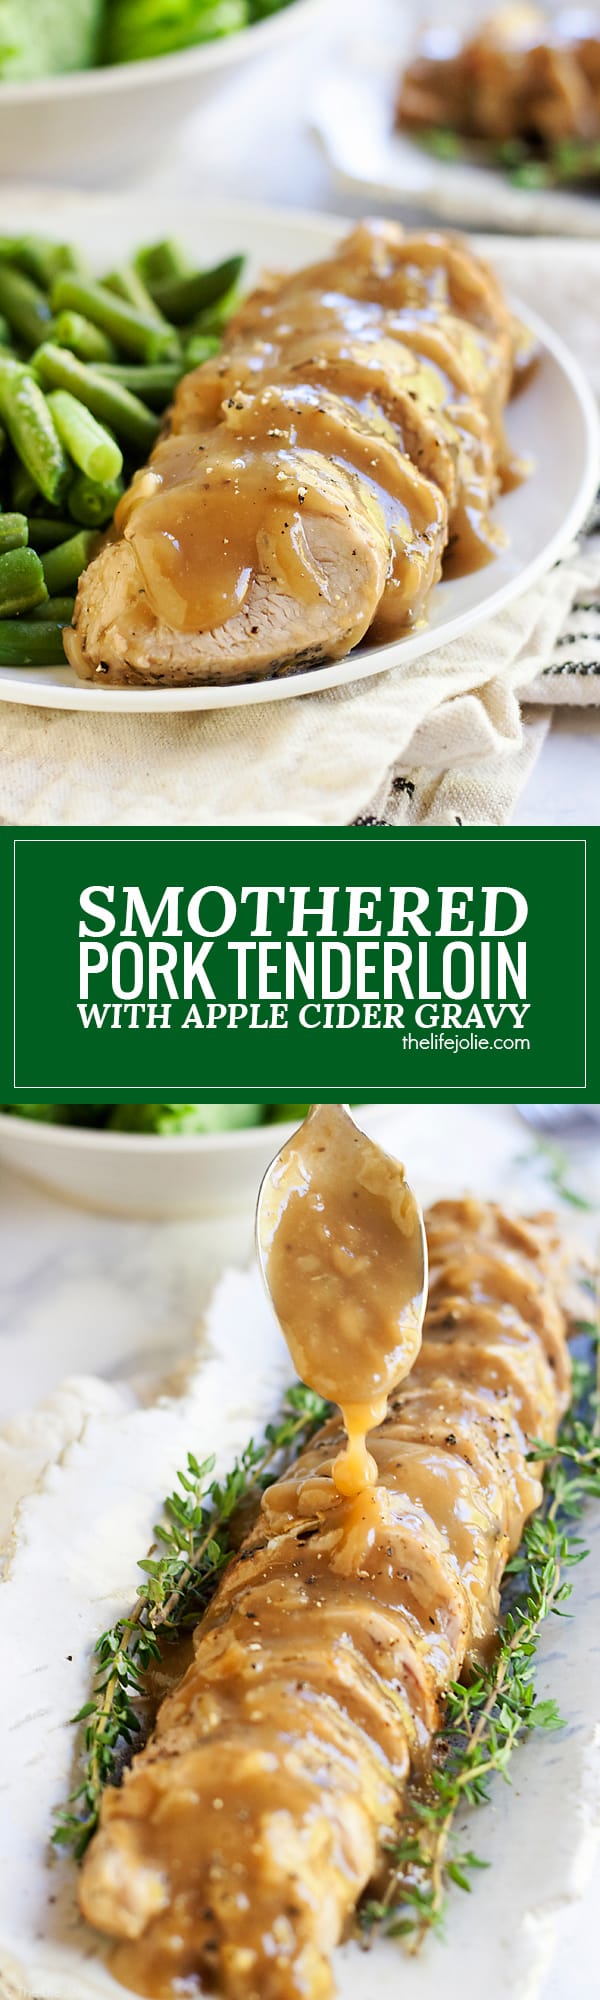 This Smothered Pork Tenderloin in Apple Cider Gravy is the best meat main dish for a holiday dinner when you have a small group of people to feed and also makes a quick and cozy weeknight meal! This recipe is so easy but tastes fantastic and comes together quickly!